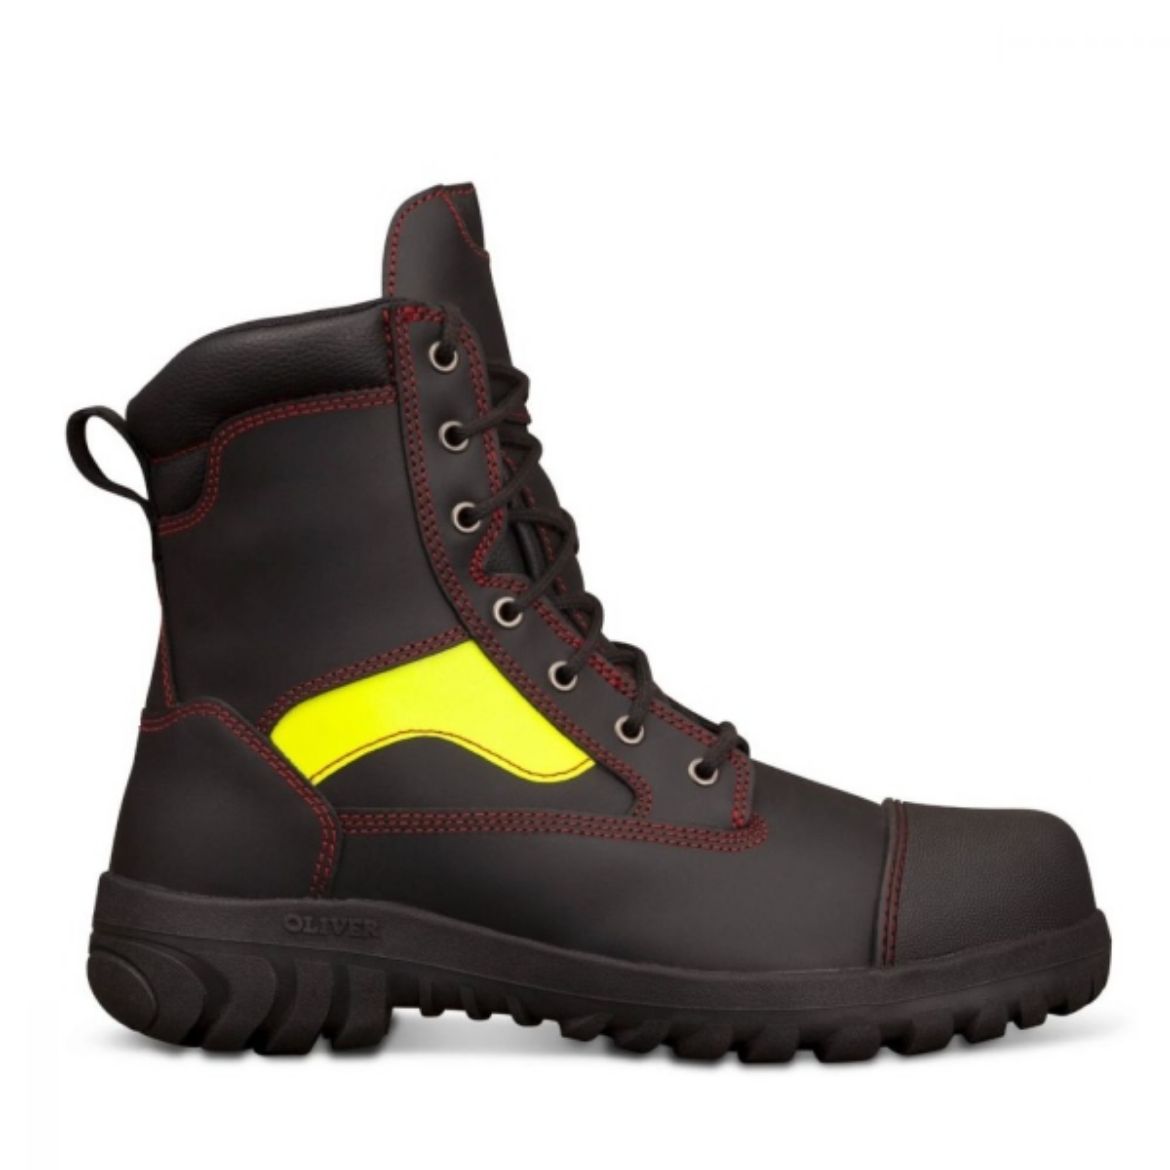 Picture of 180MM LACE UP WILDLAND FIRE FIGHTERS BOOT, COMPOSITE TOE CAP, OPTIONAL
LACE IN ZIPPER ATTACHMENT.